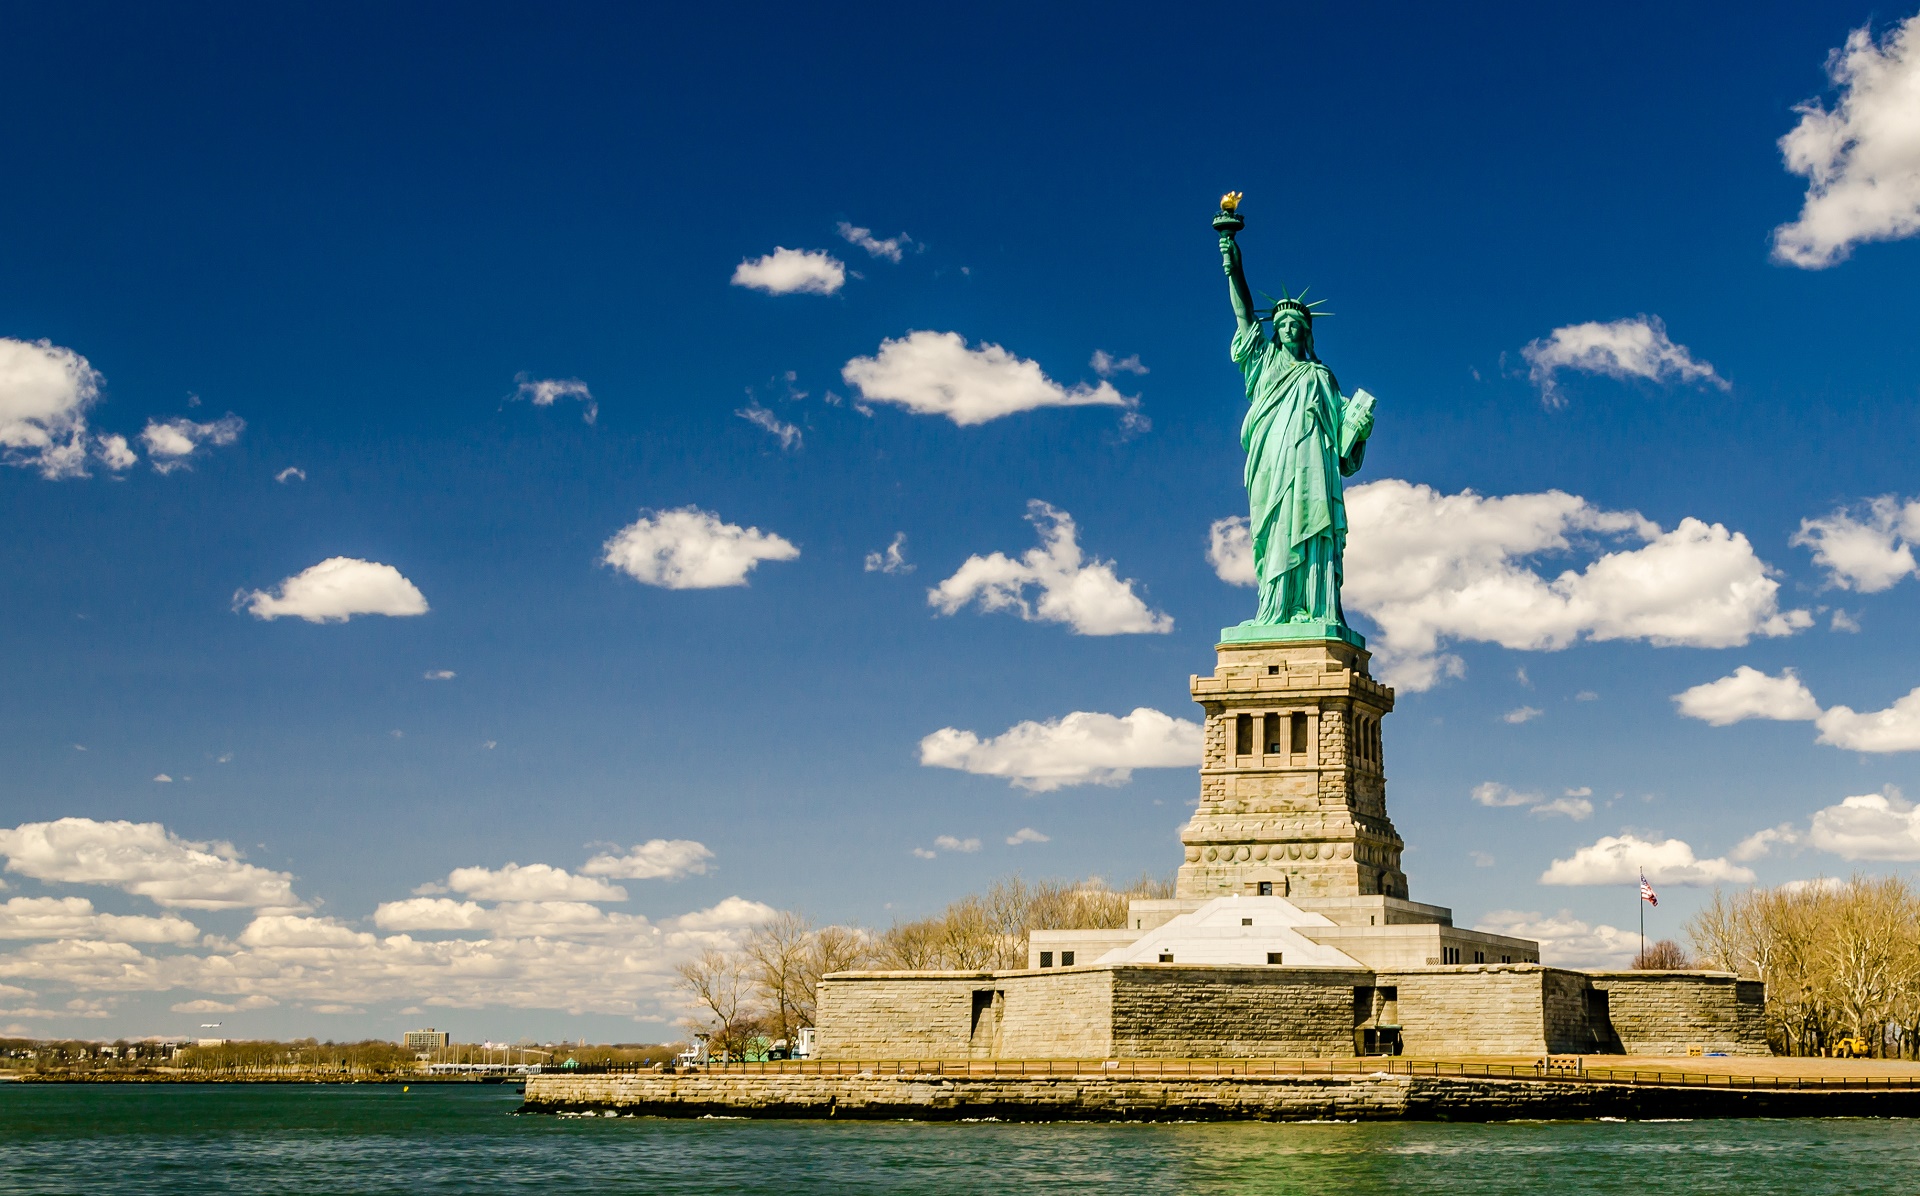 Statue Of Liberty Wallpapers Pictures Images HD Wallpapers Download Free Map Images Wallpaper [wallpaper684.blogspot.com]